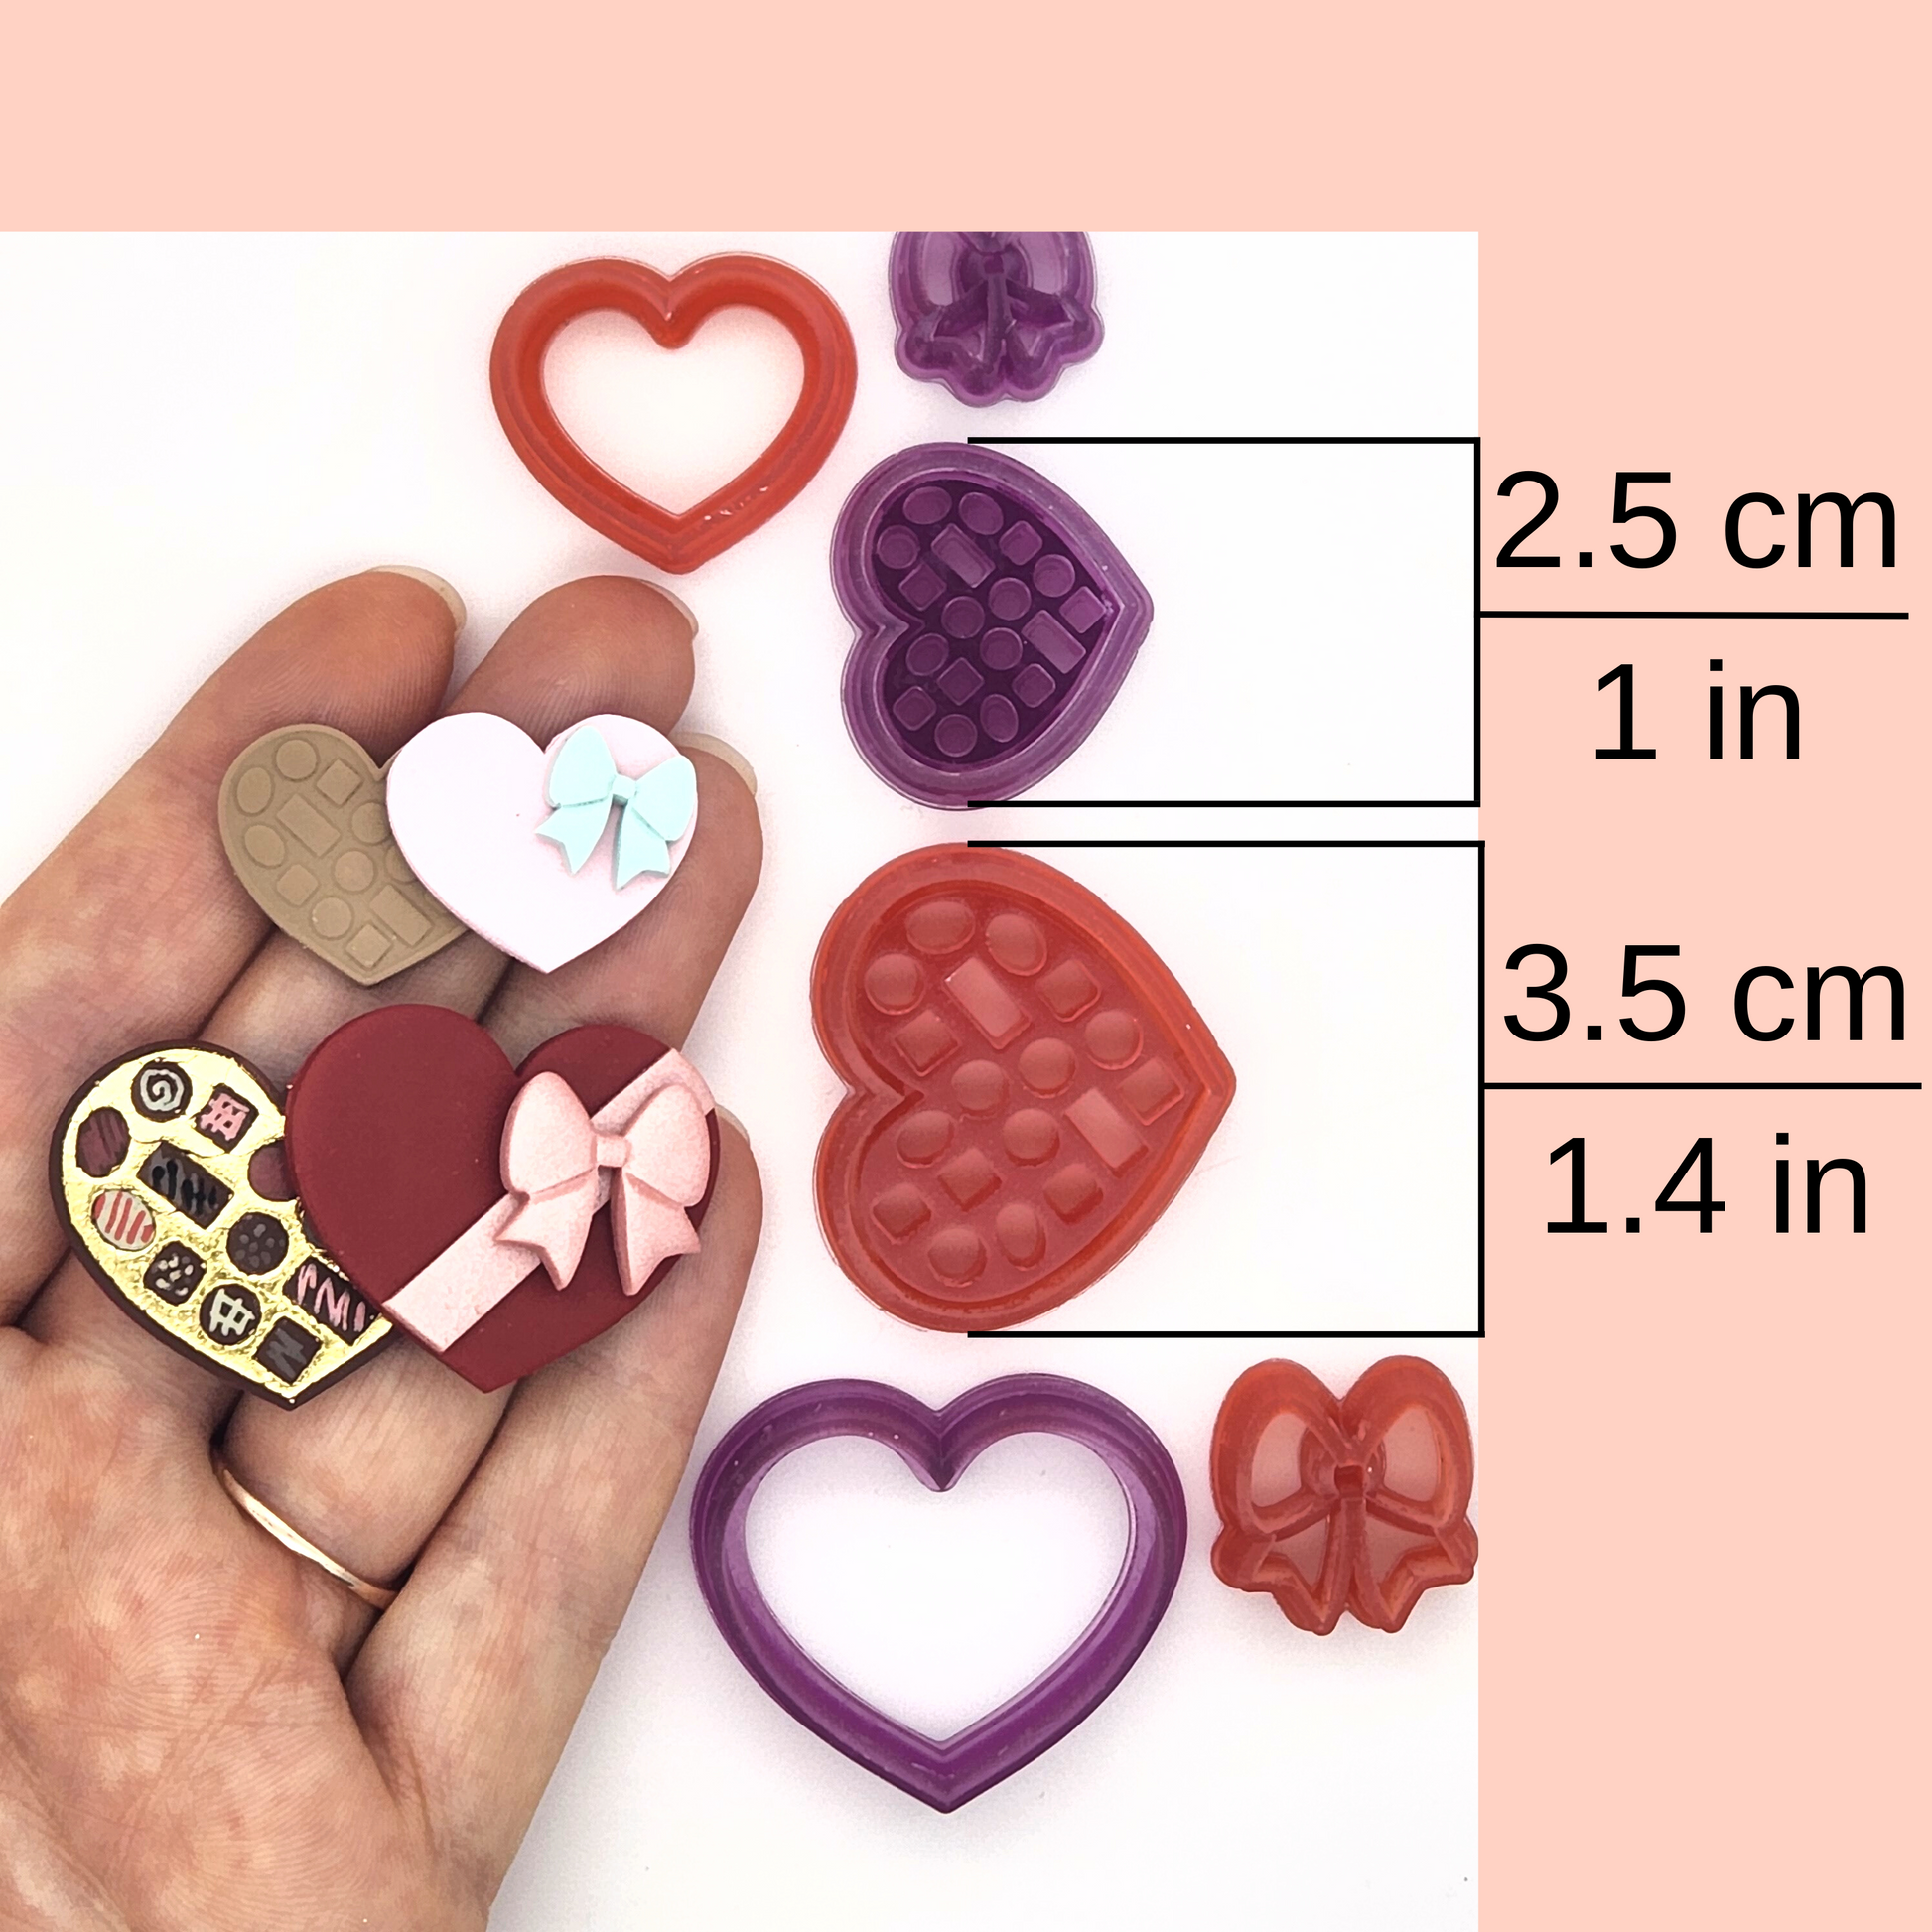 Box of chocolates clay cutter set available sizes, 2.5 centimeters / 1 inches, 3.5 centimeters / 1.4 inches. In photo, sample box of chocolates set finish product in different sizes